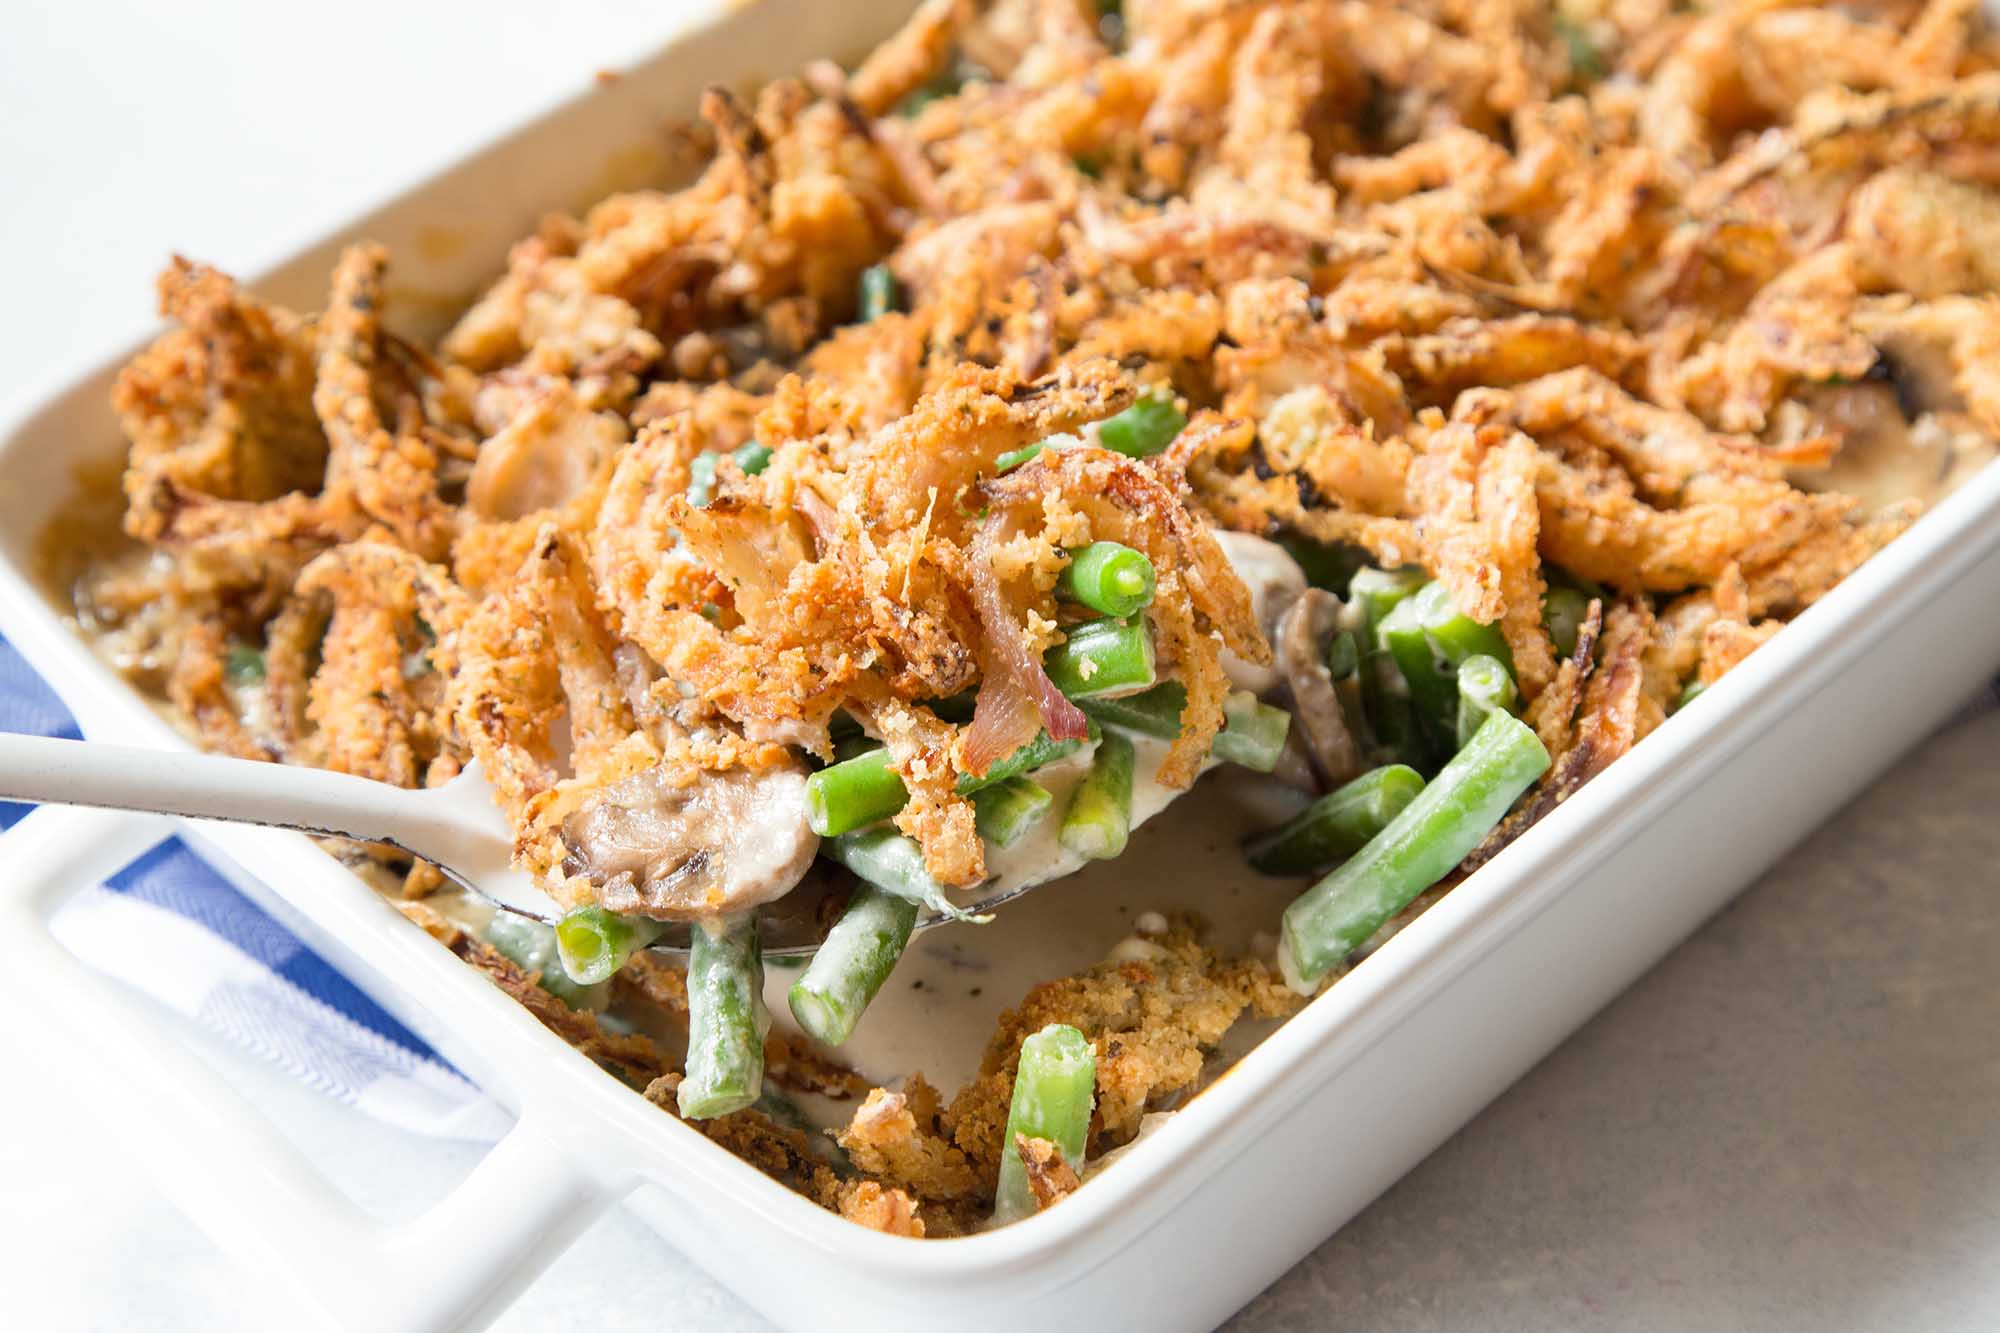 It’s Time to Find Out What Your 🥳 Holiday Vibe Is With the 🎄 Christmas Feast You Plan Green bean casserole